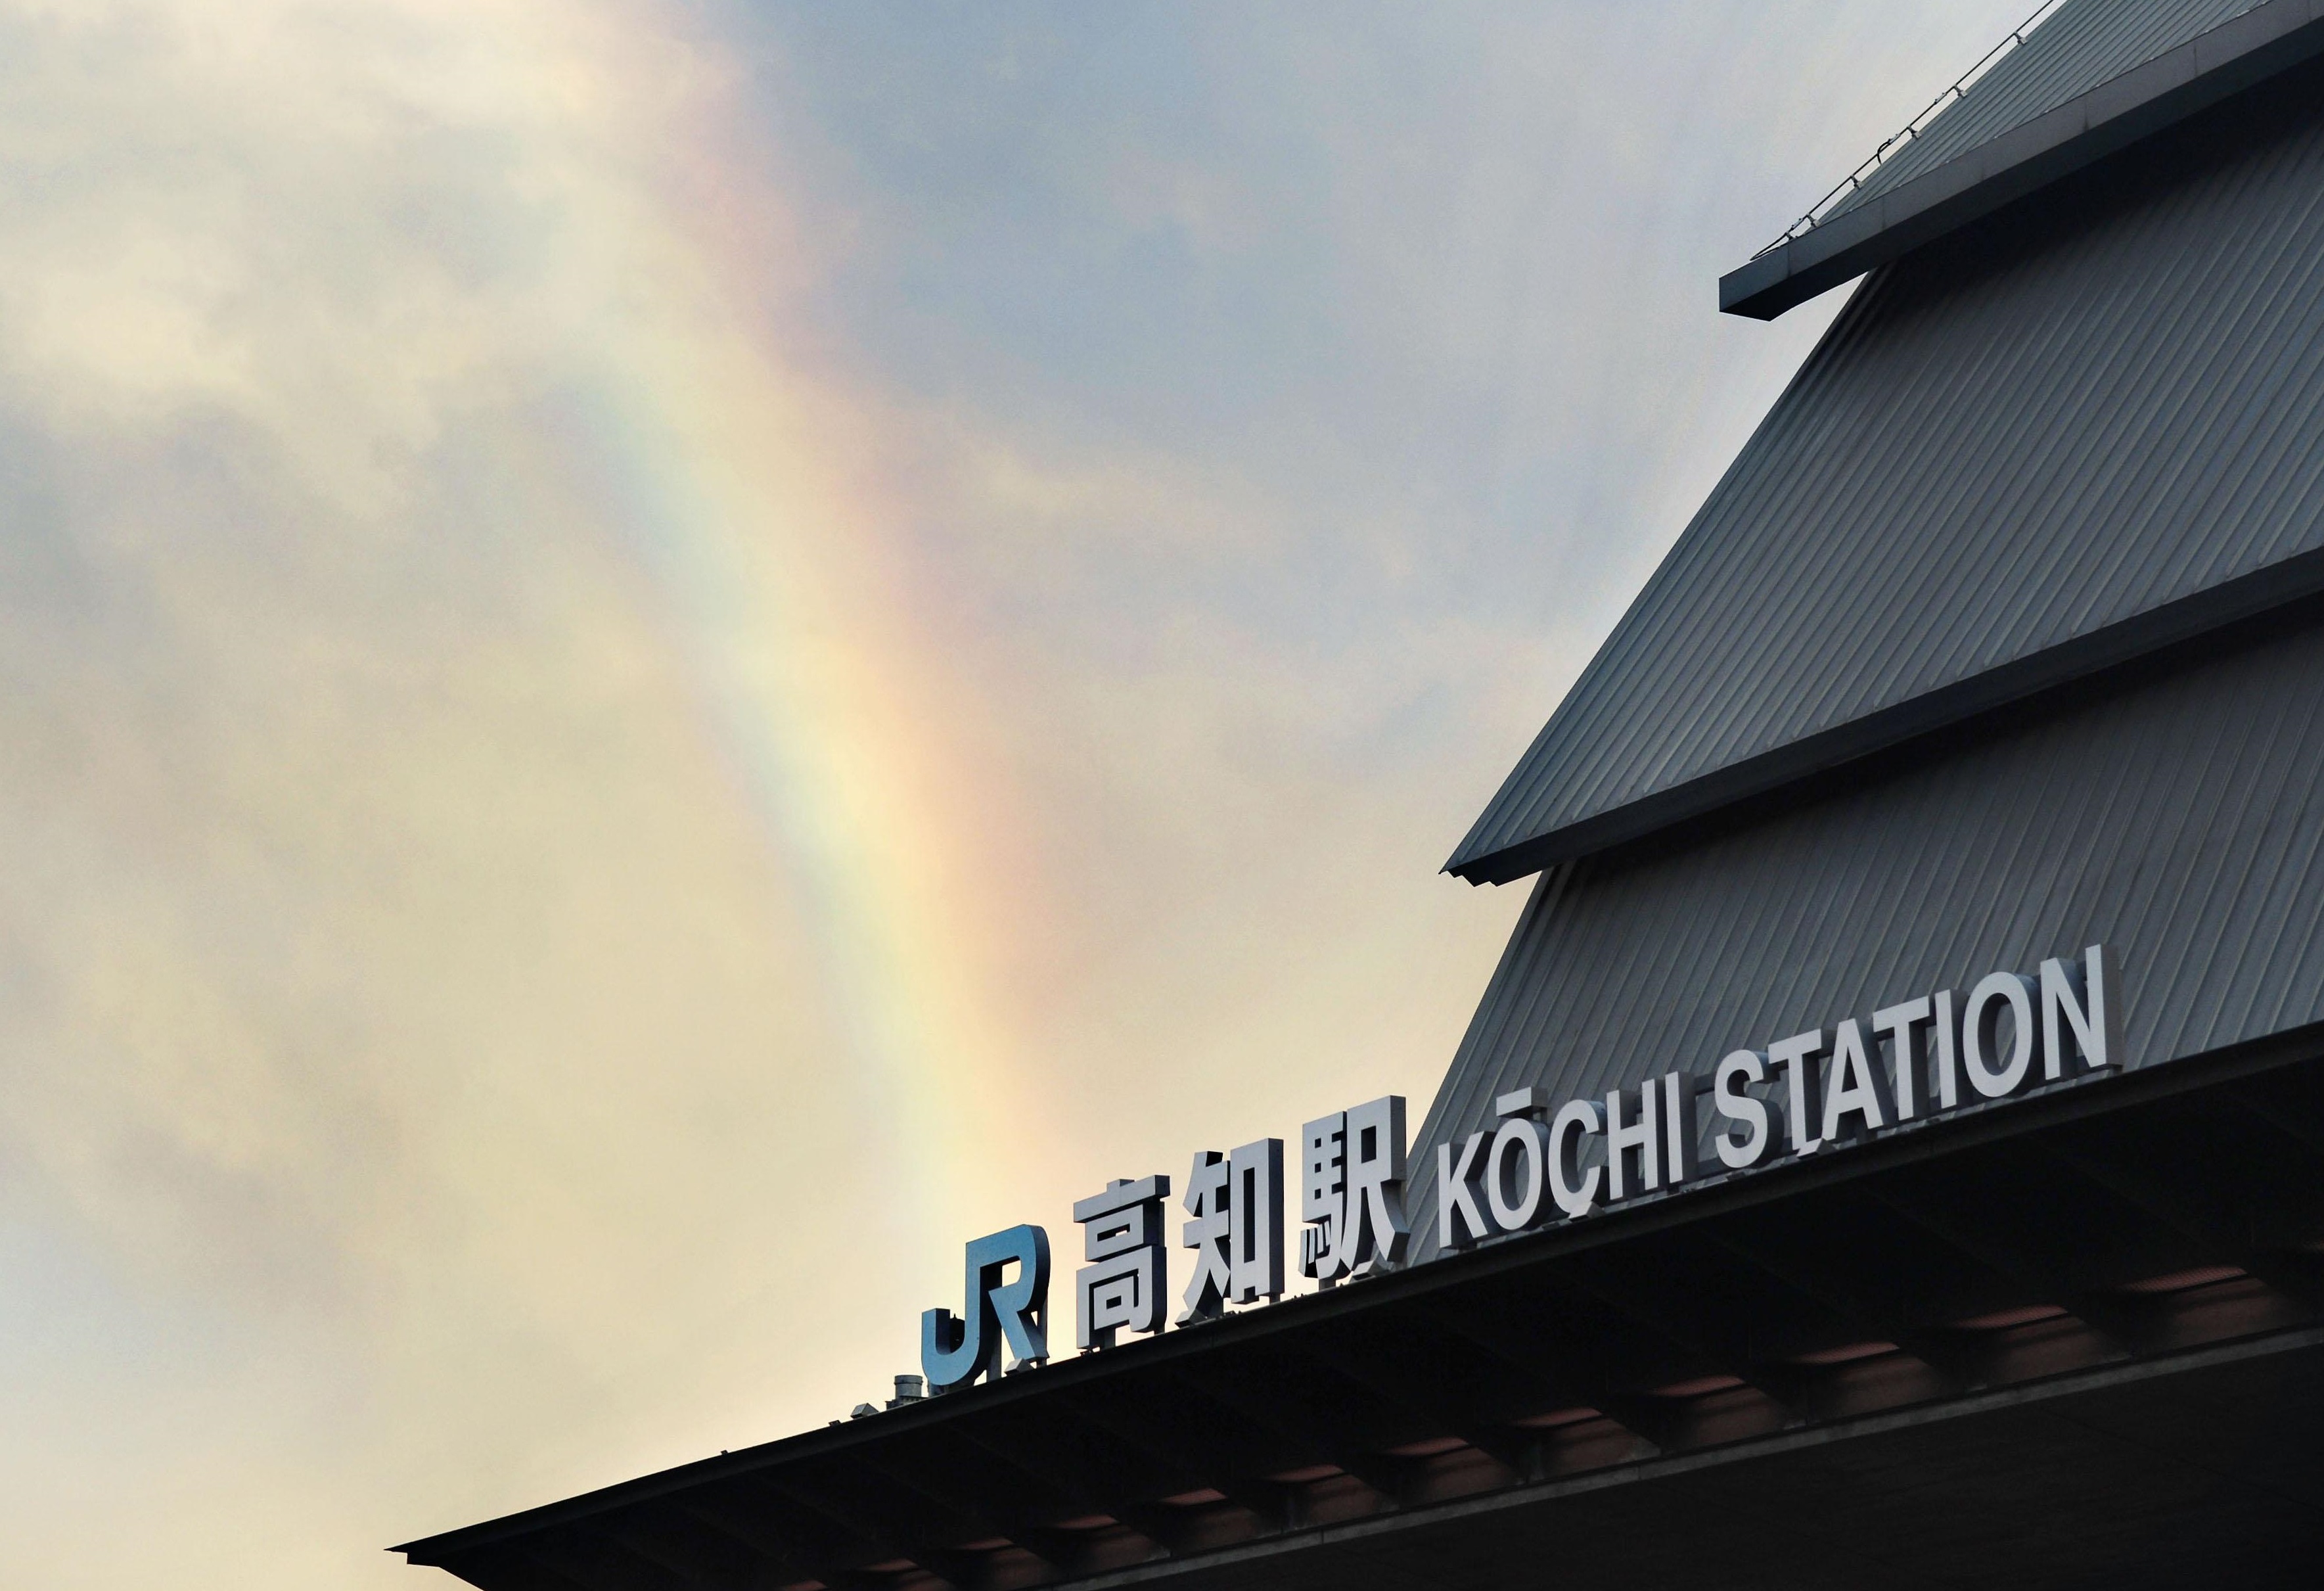 A rainbow appears over JR Kochi Station Monday afternoon when Kochi was in the eye of Typhoon Vongfong. The season's 19th typhoon swept through Honshu toward the Pacific Tuesday morning. | KYODO